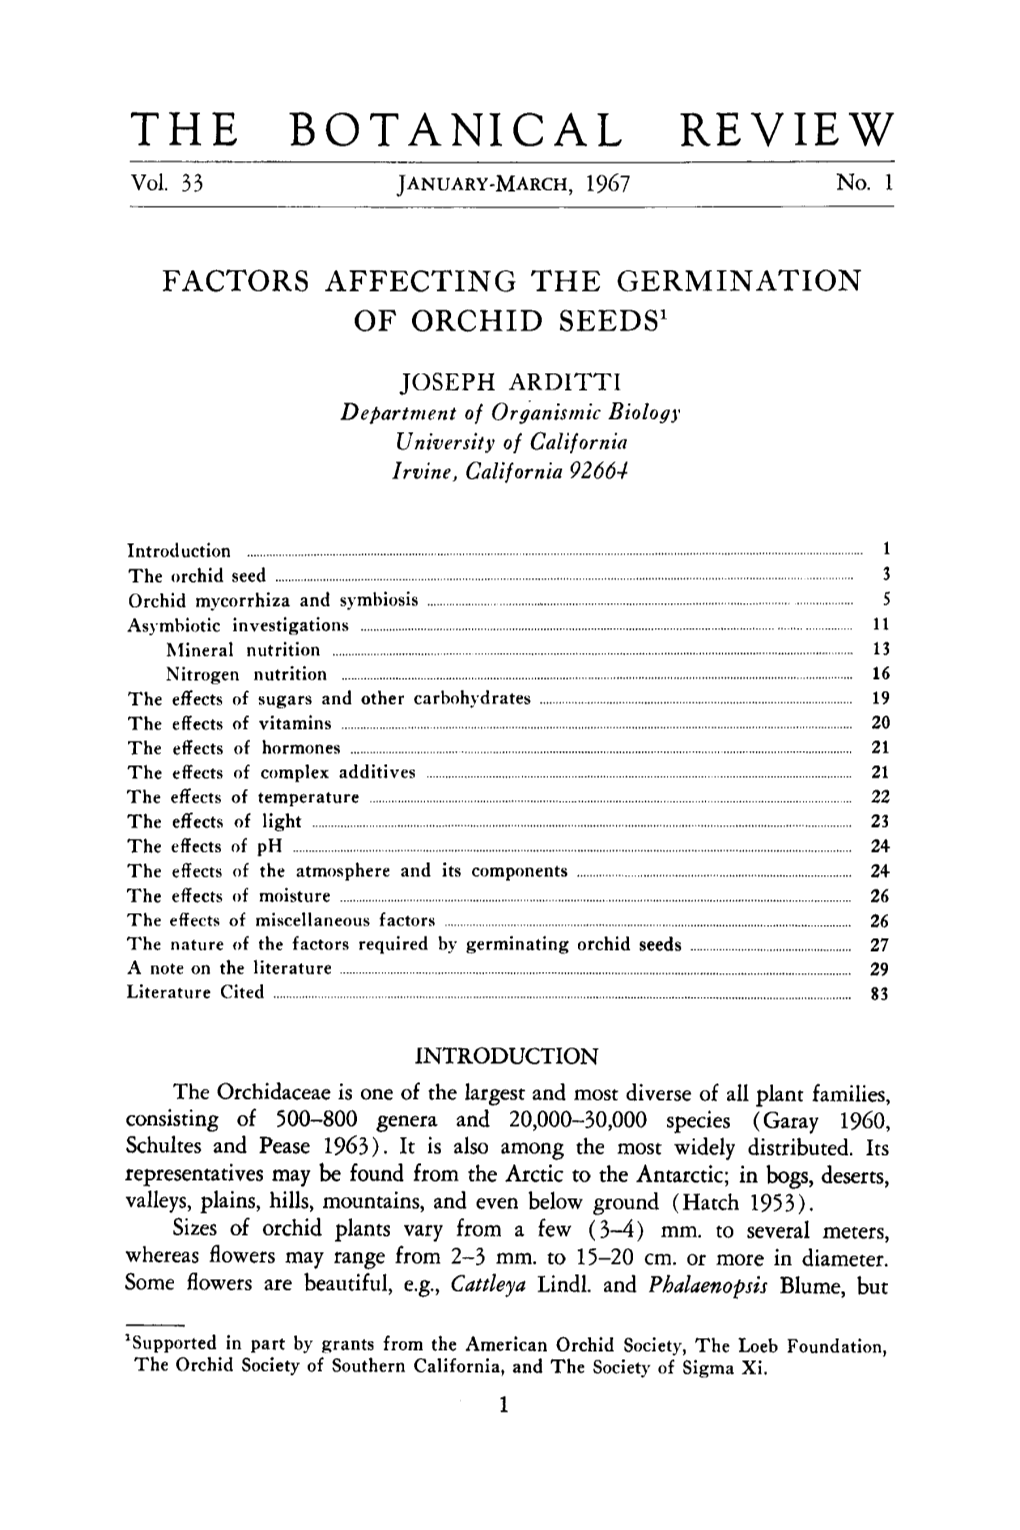 Factors Affecting the Germination of Orchid Seeds 1